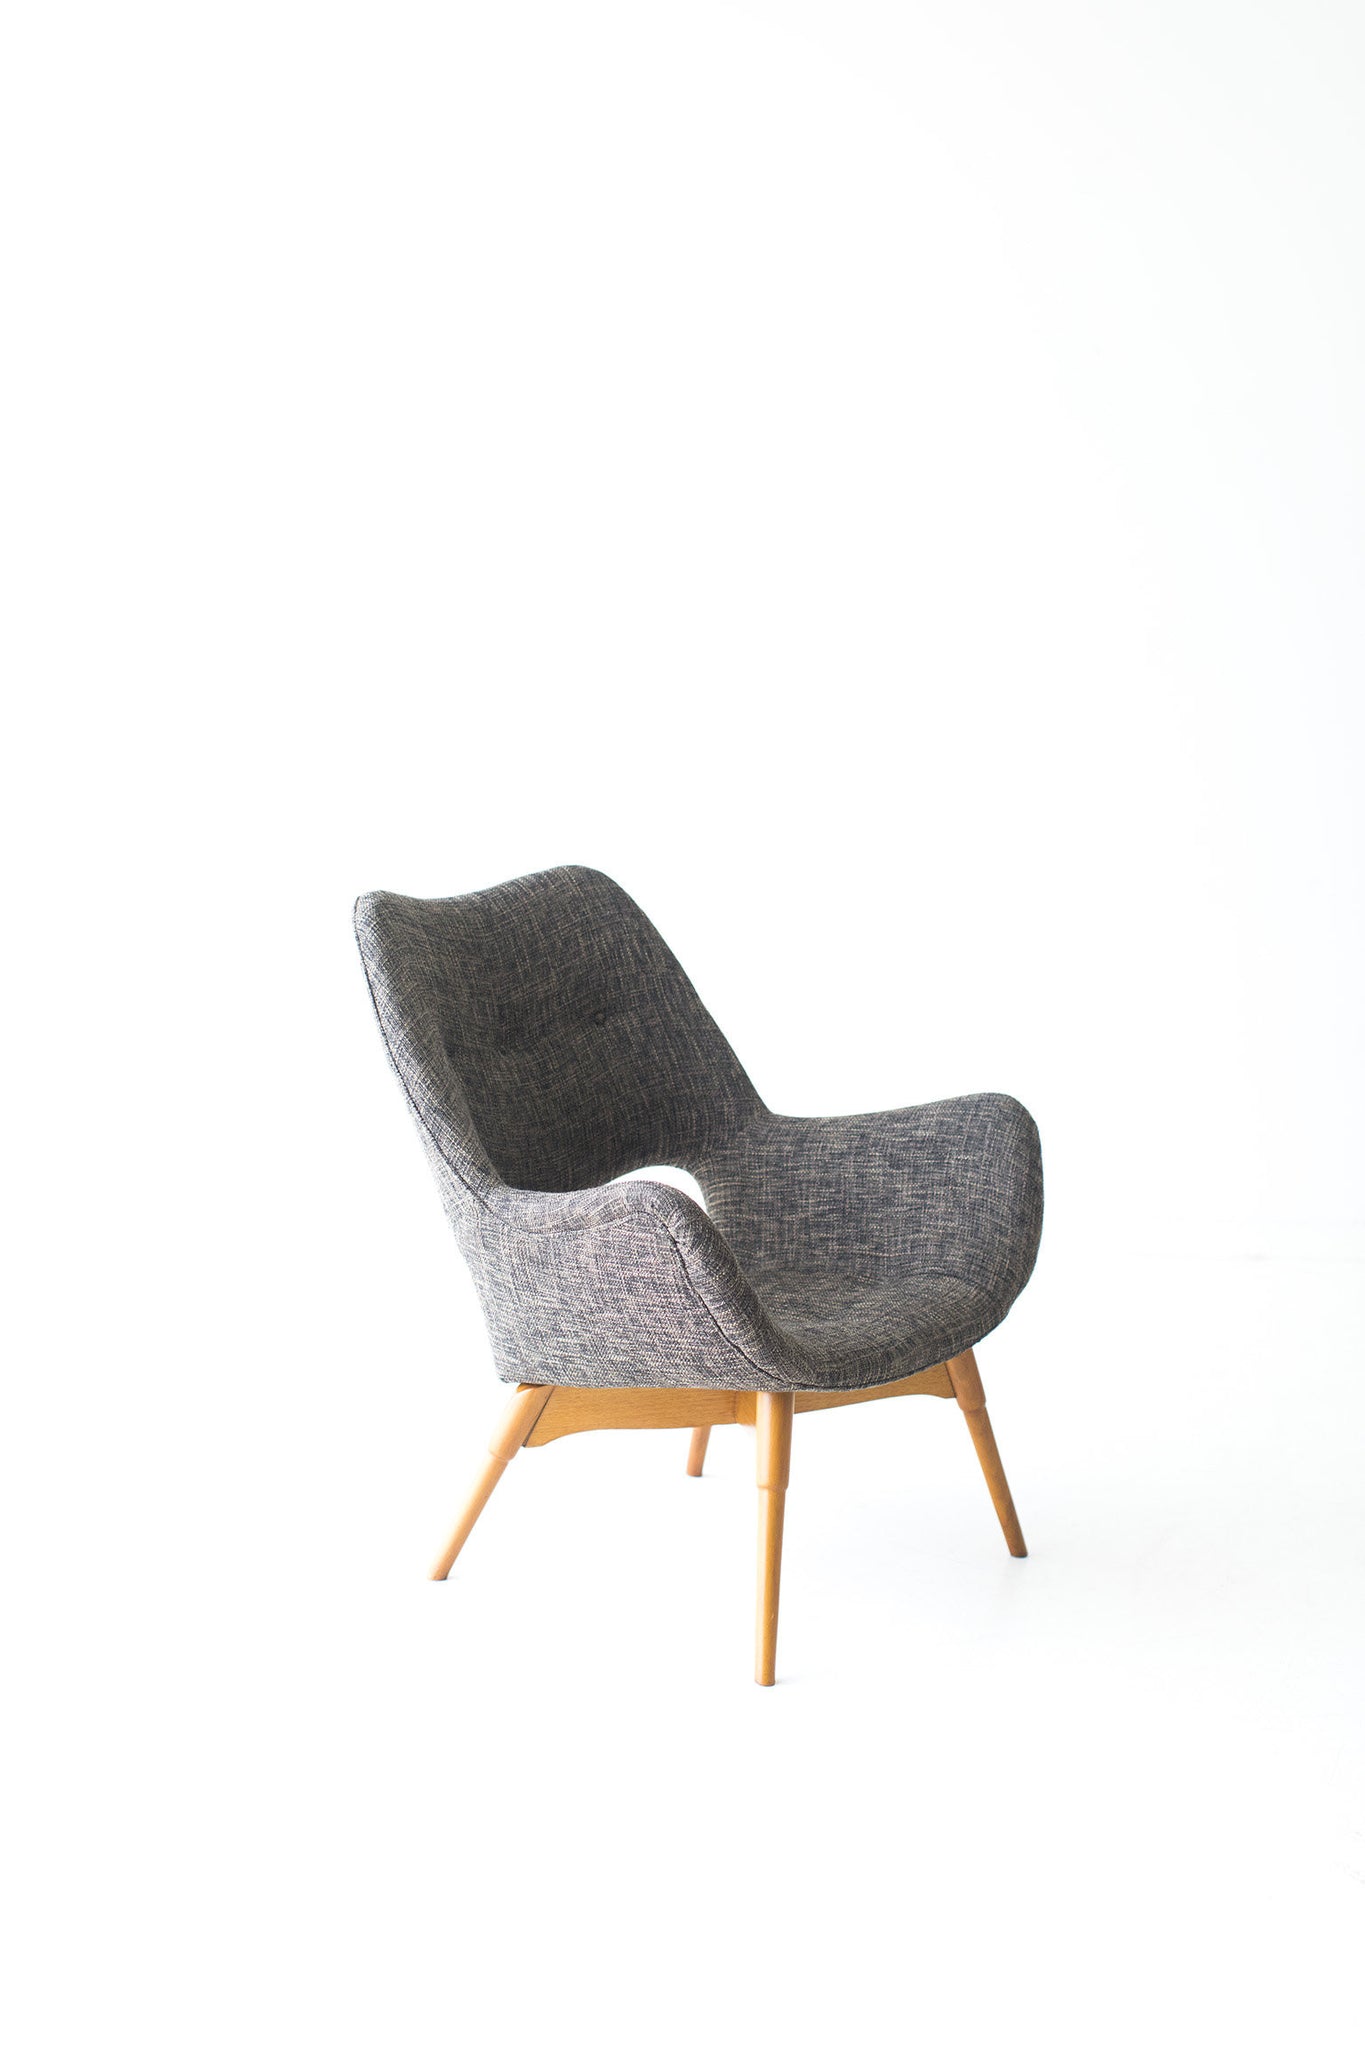 grant-featherston-lounge-chair-03